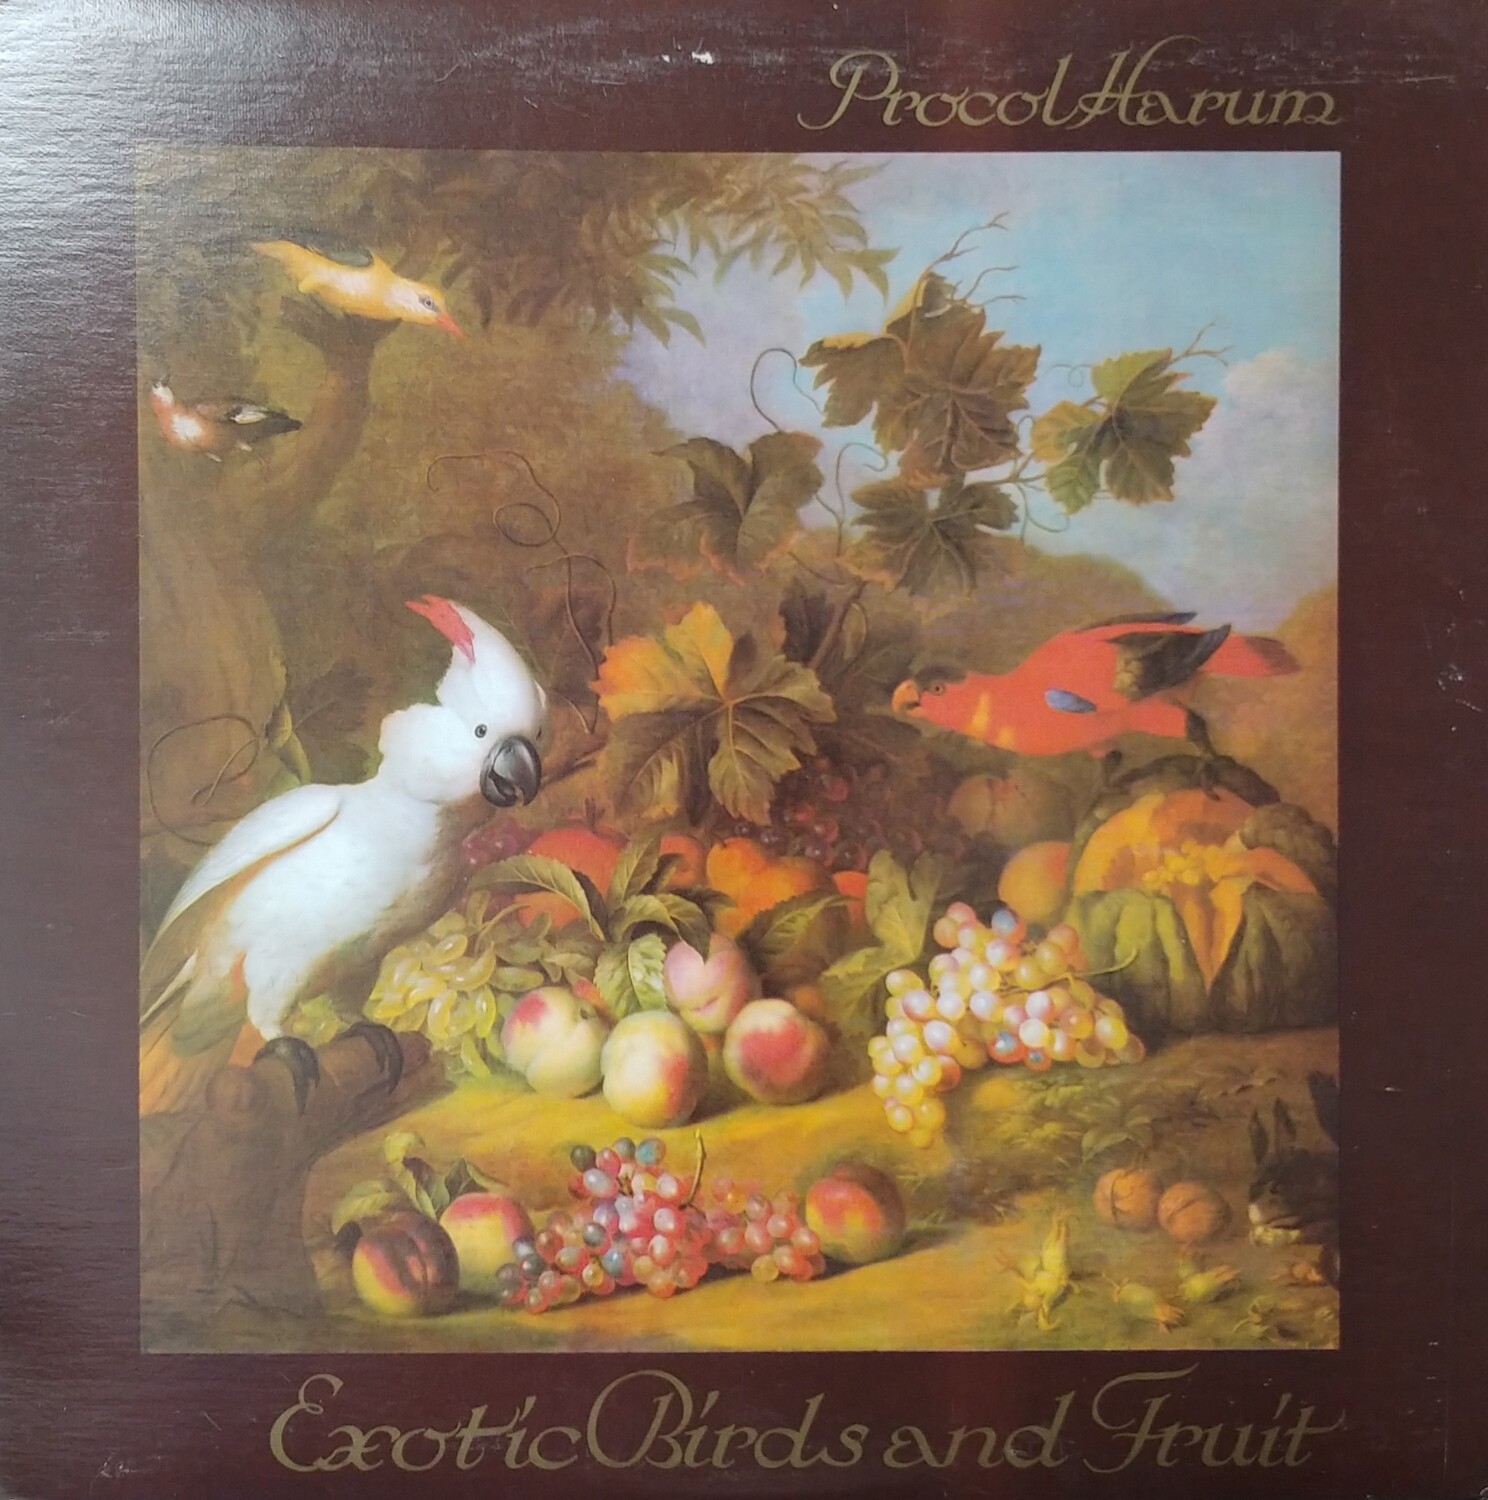 Procol Harum - Exotic Birds and Fruits